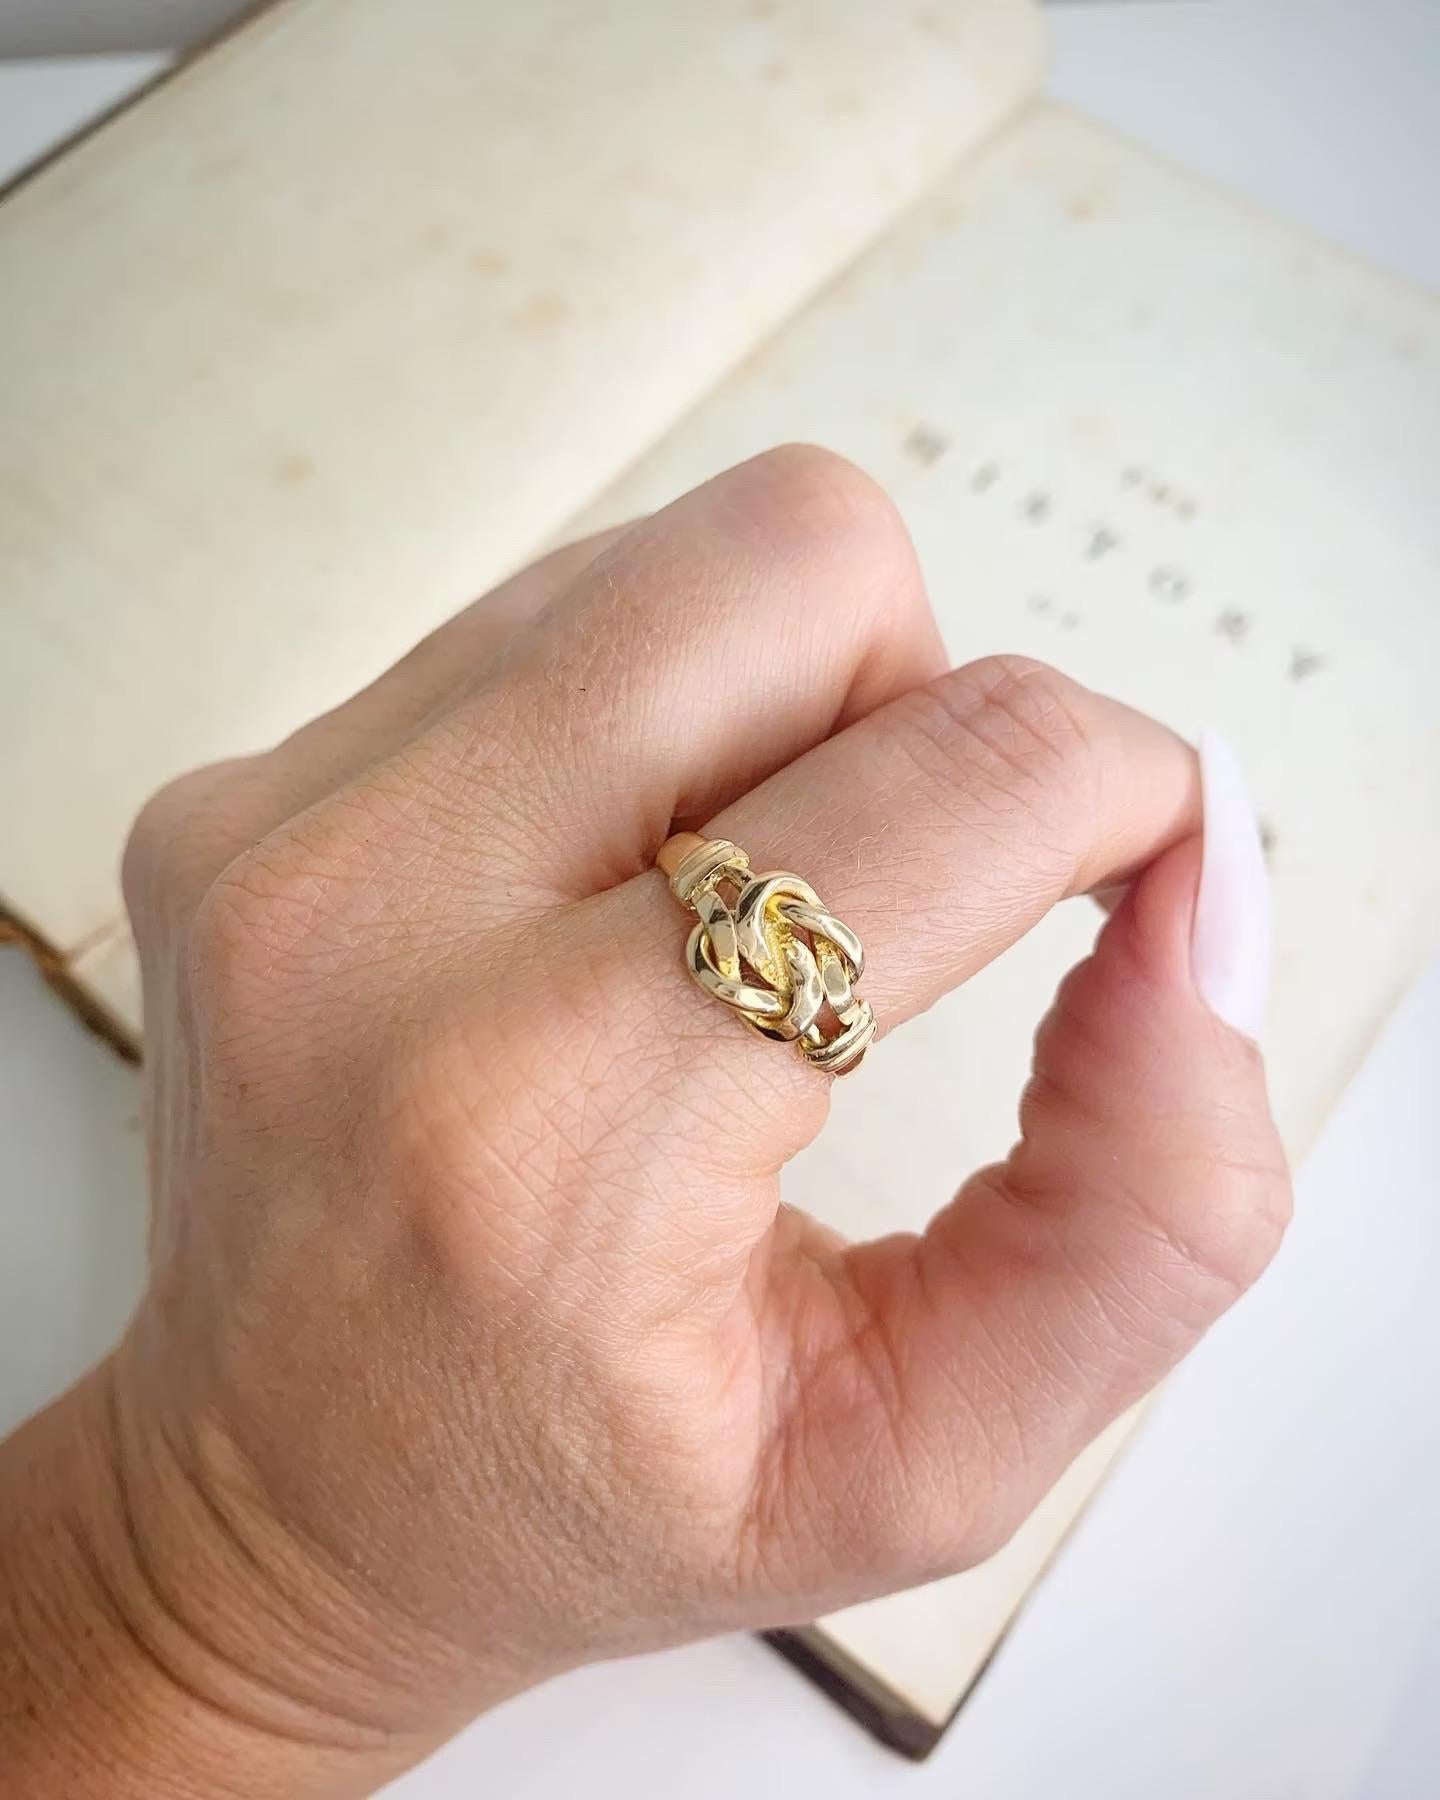 Antique Knot Ring 

18ct Gold 

Hallmarked Birmingham 1897

Beautiful gold Victorian ’lovers knot’ ring.
The lover's knot has a long history of being a symbol of love. It represents the unbreakable bond and eternal connection between two lovers.